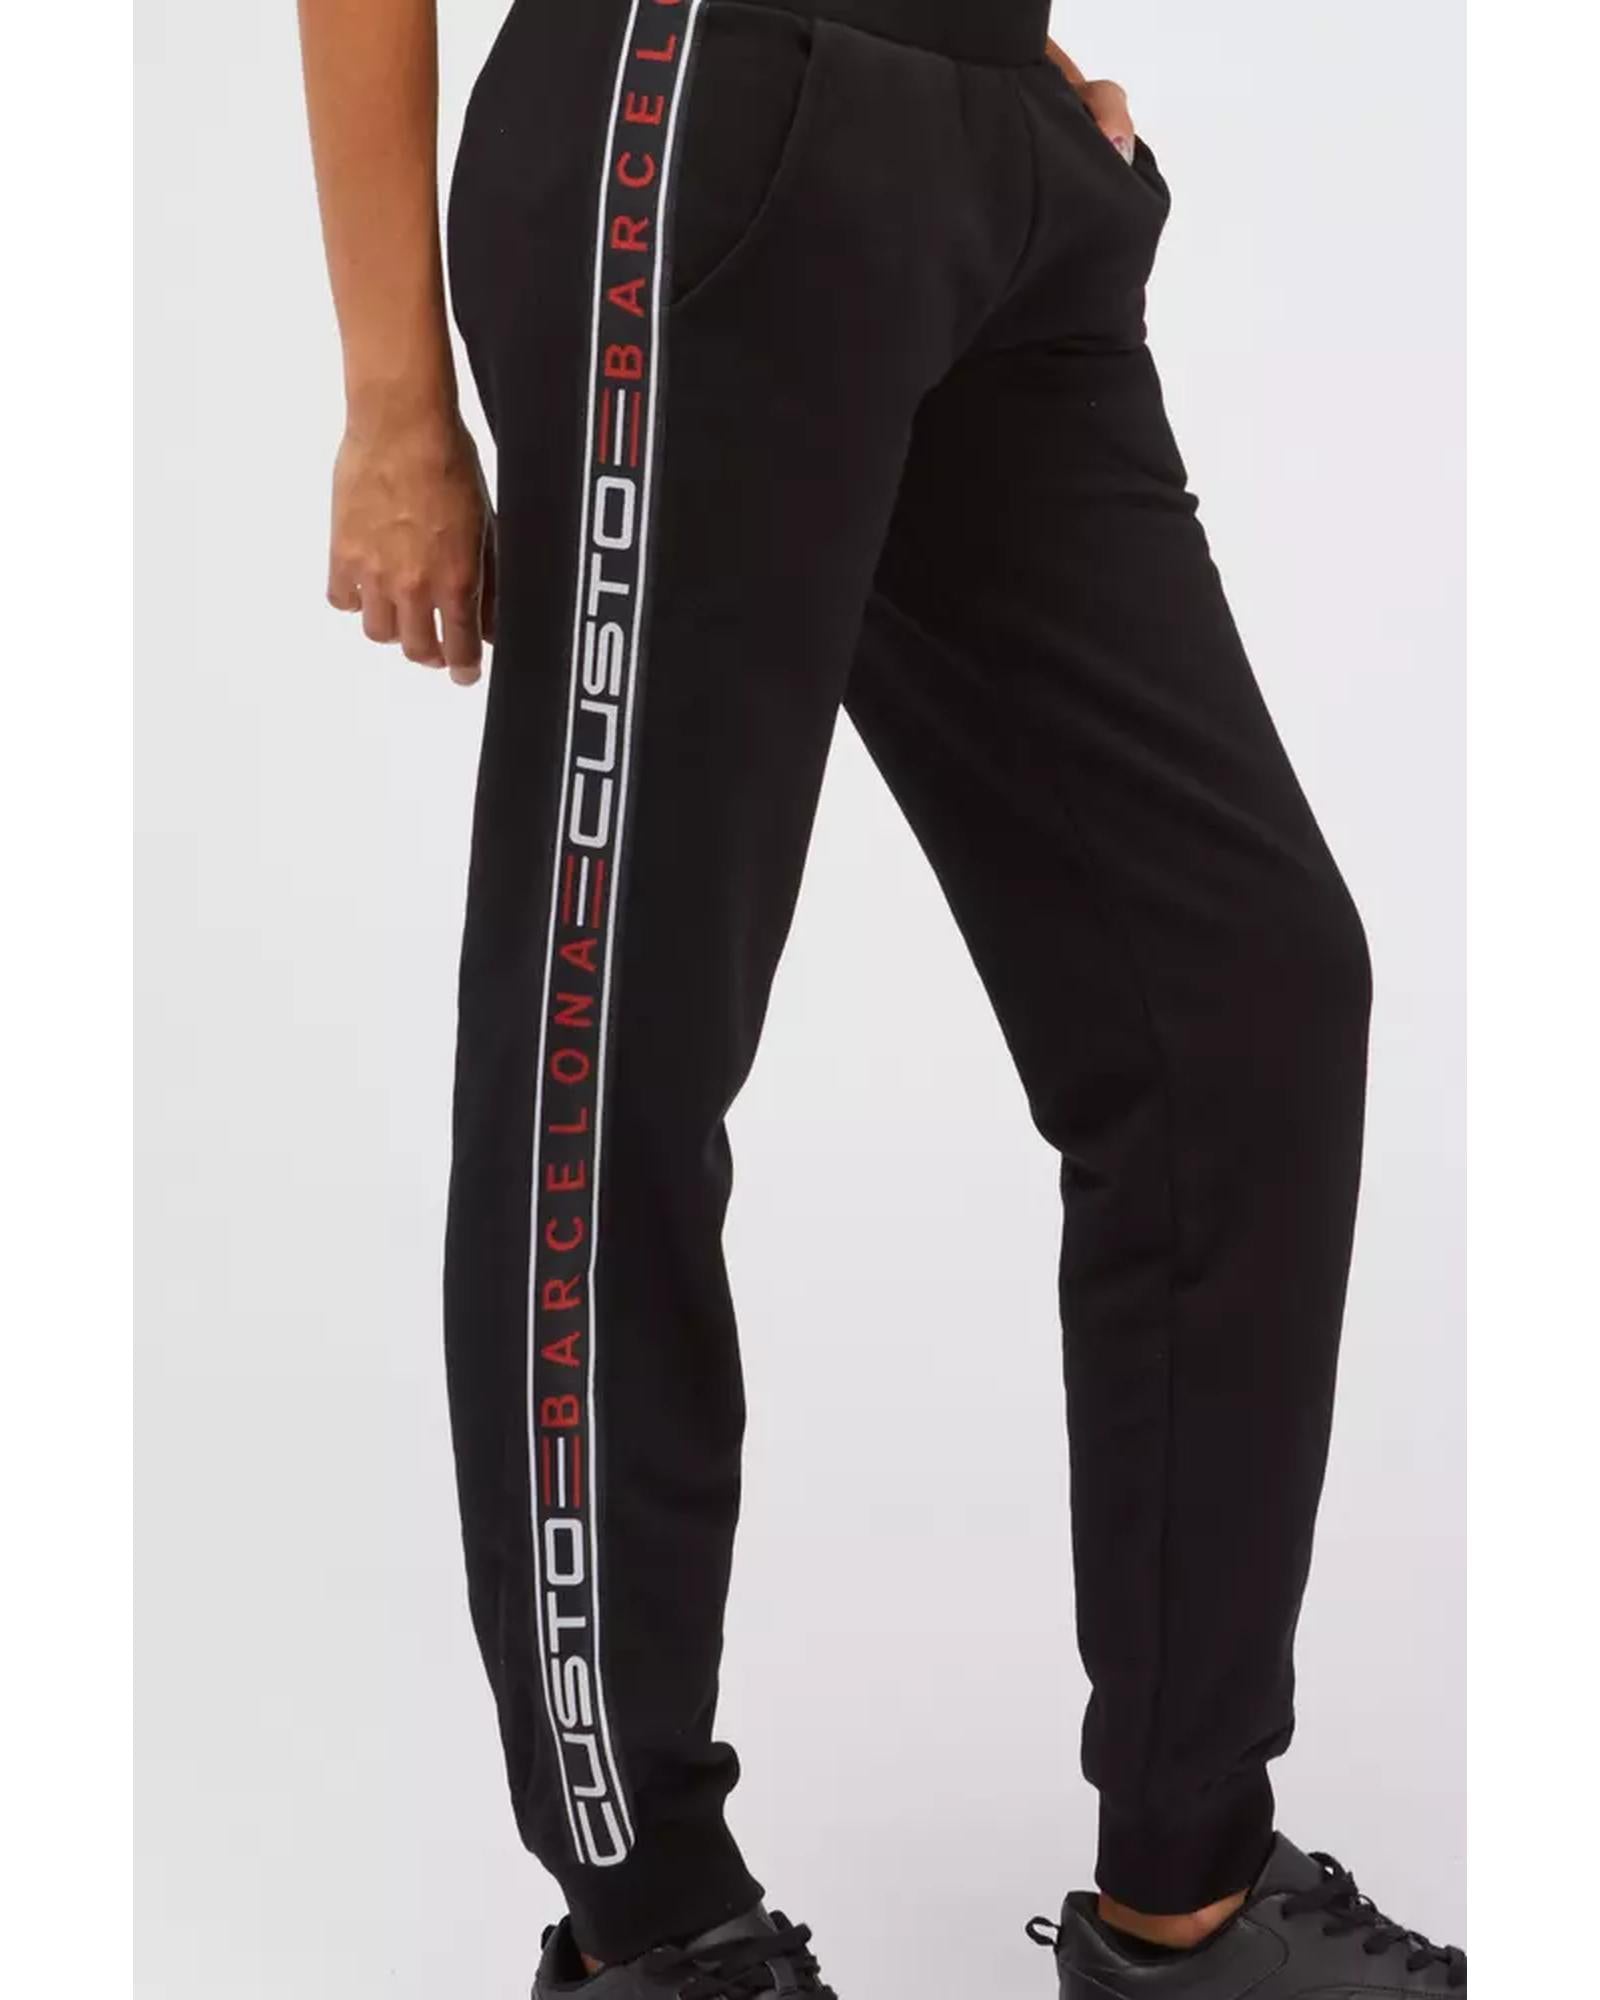 Logo Side Band Solid Color Sweatpants with Multi-Pockets and Cuffed Bottom S Women